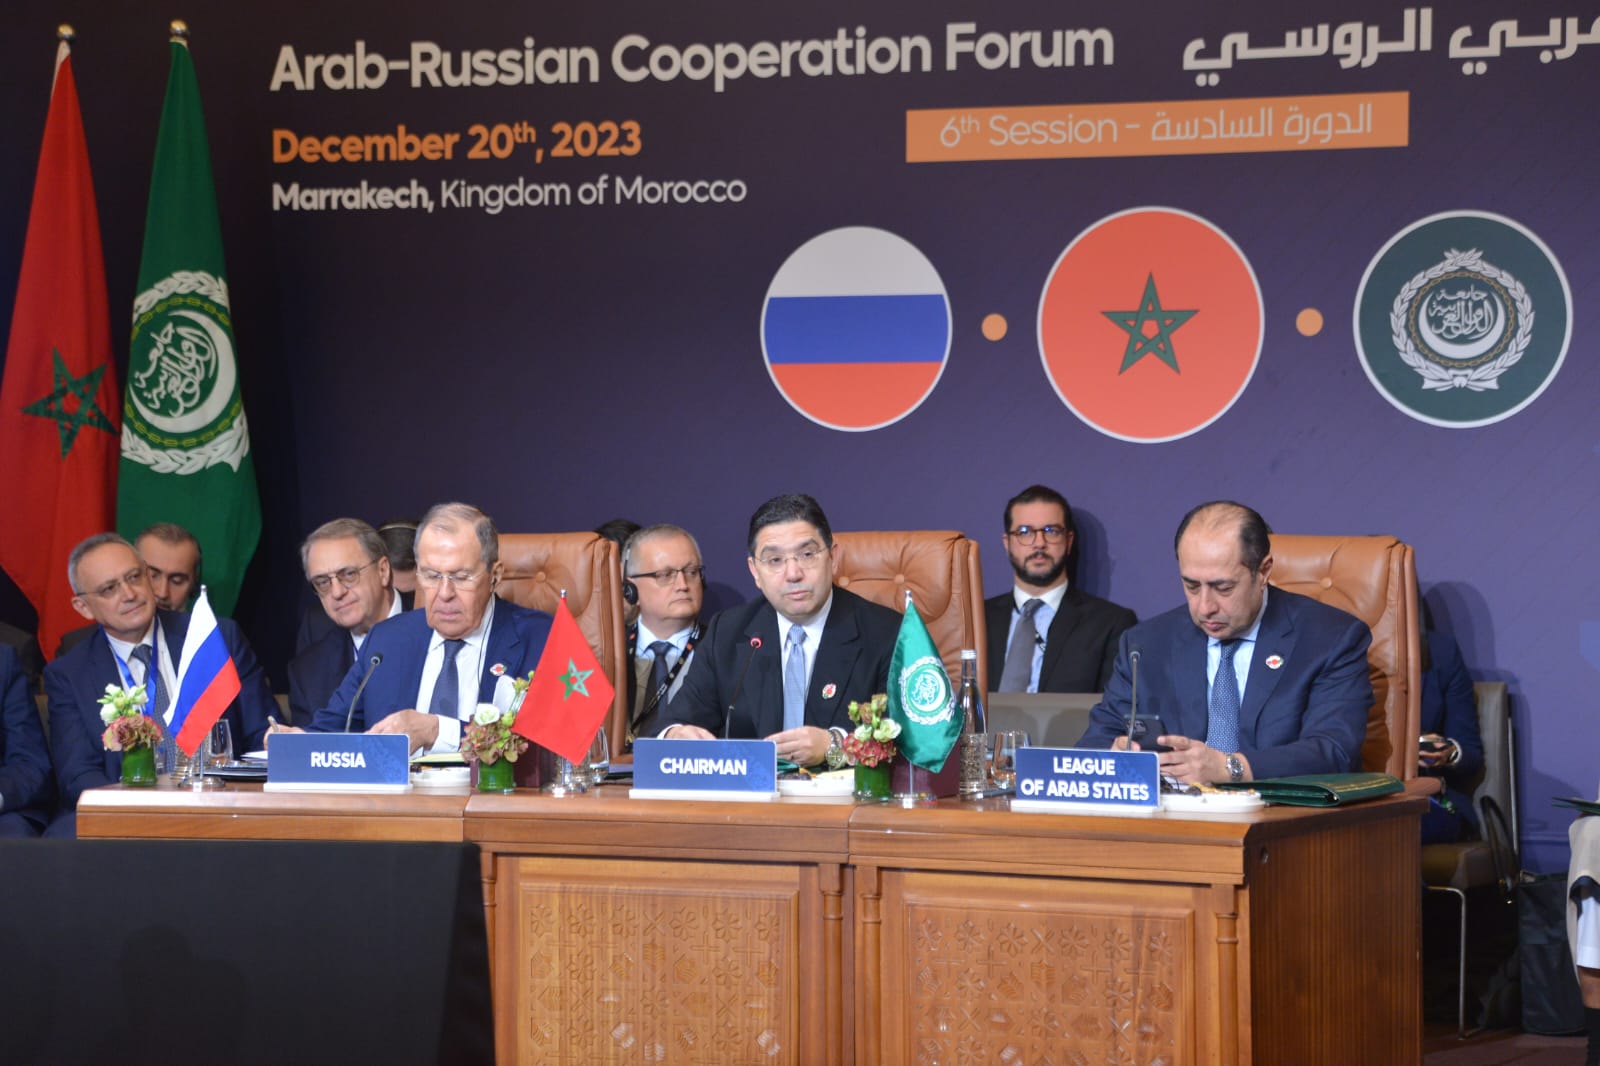 Respect for territorial integrity, salient theme in Russia-Arab cooperation forum